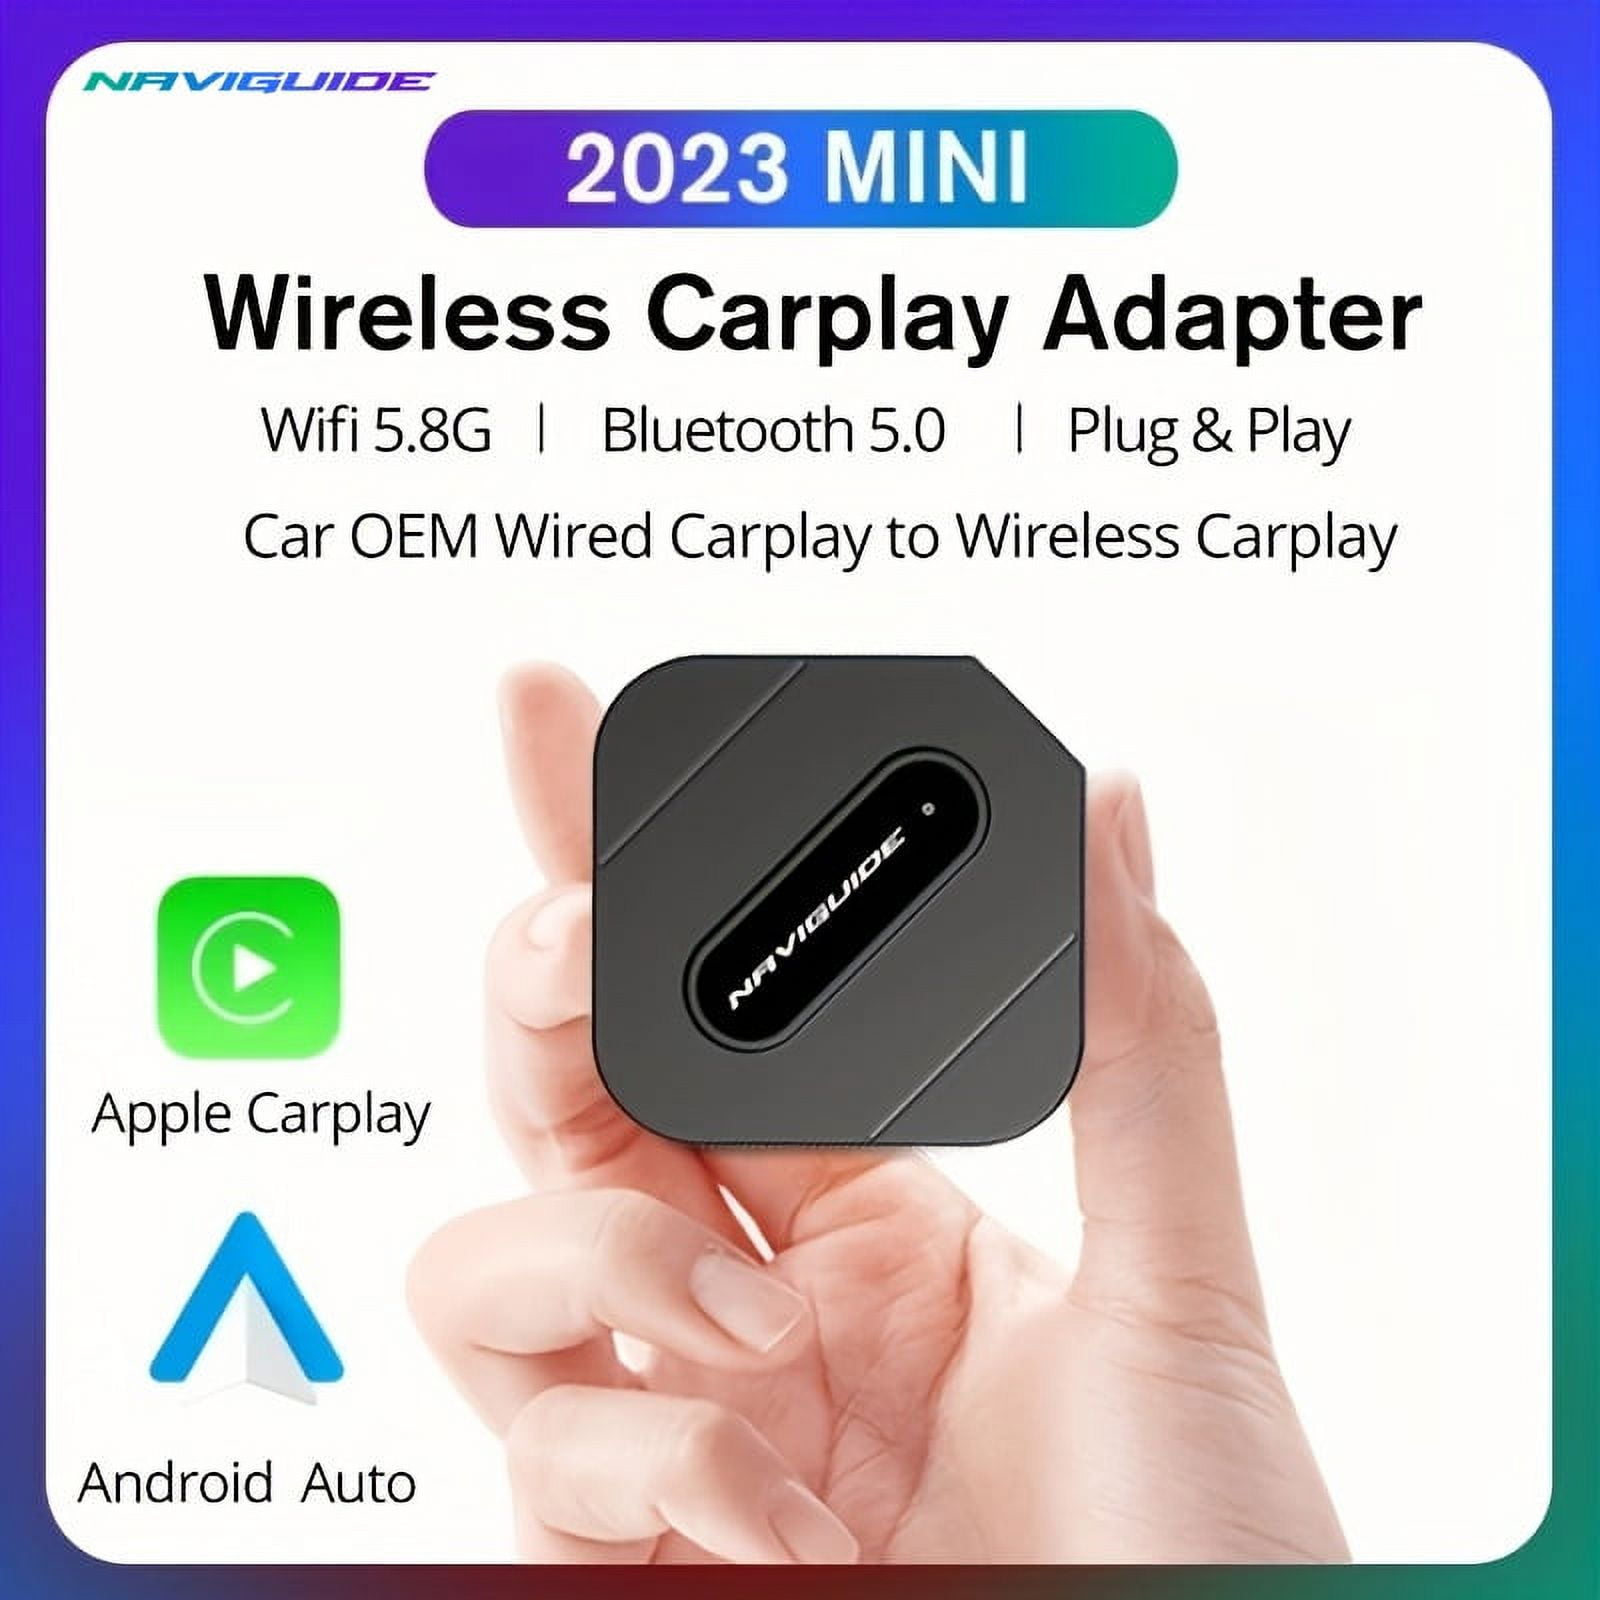  Wireless Carplay Adapter & Android Auto Adapter for iPhone  Android Phone, Apple Car Play Dongle Magic AI Box for OEM Wired Carplay  Android Auto to Upgrade, 5.8G WiFi Bluetooth 5.2 